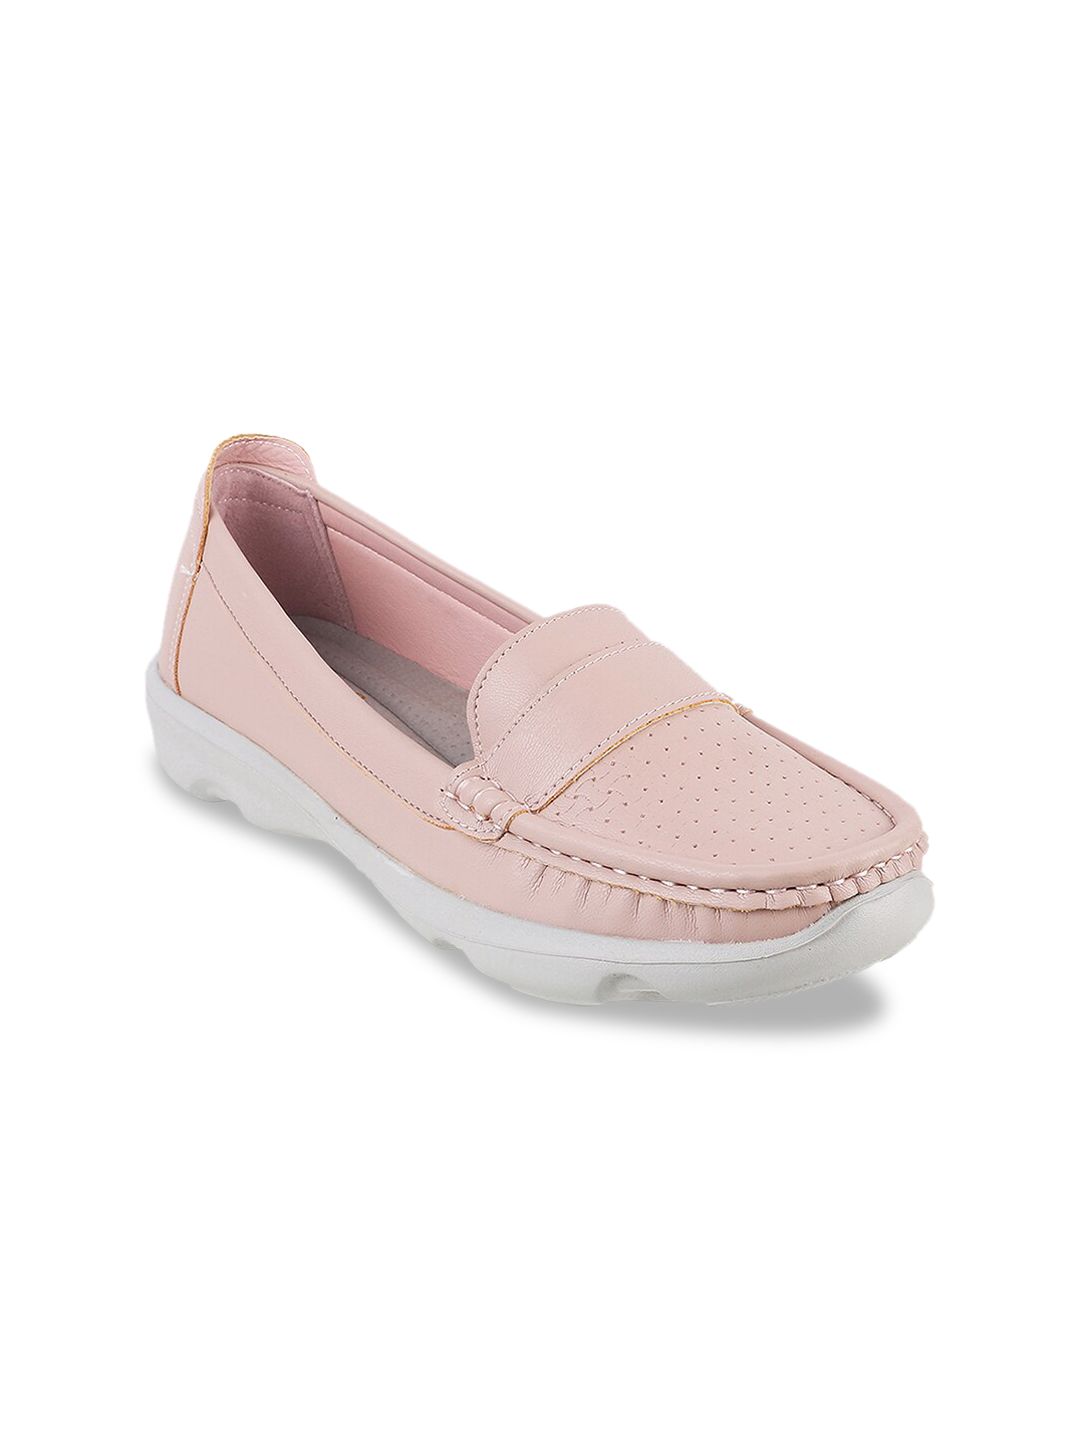 Metro Women Pink Ballerinas with Laser Cuts Flats Price in India